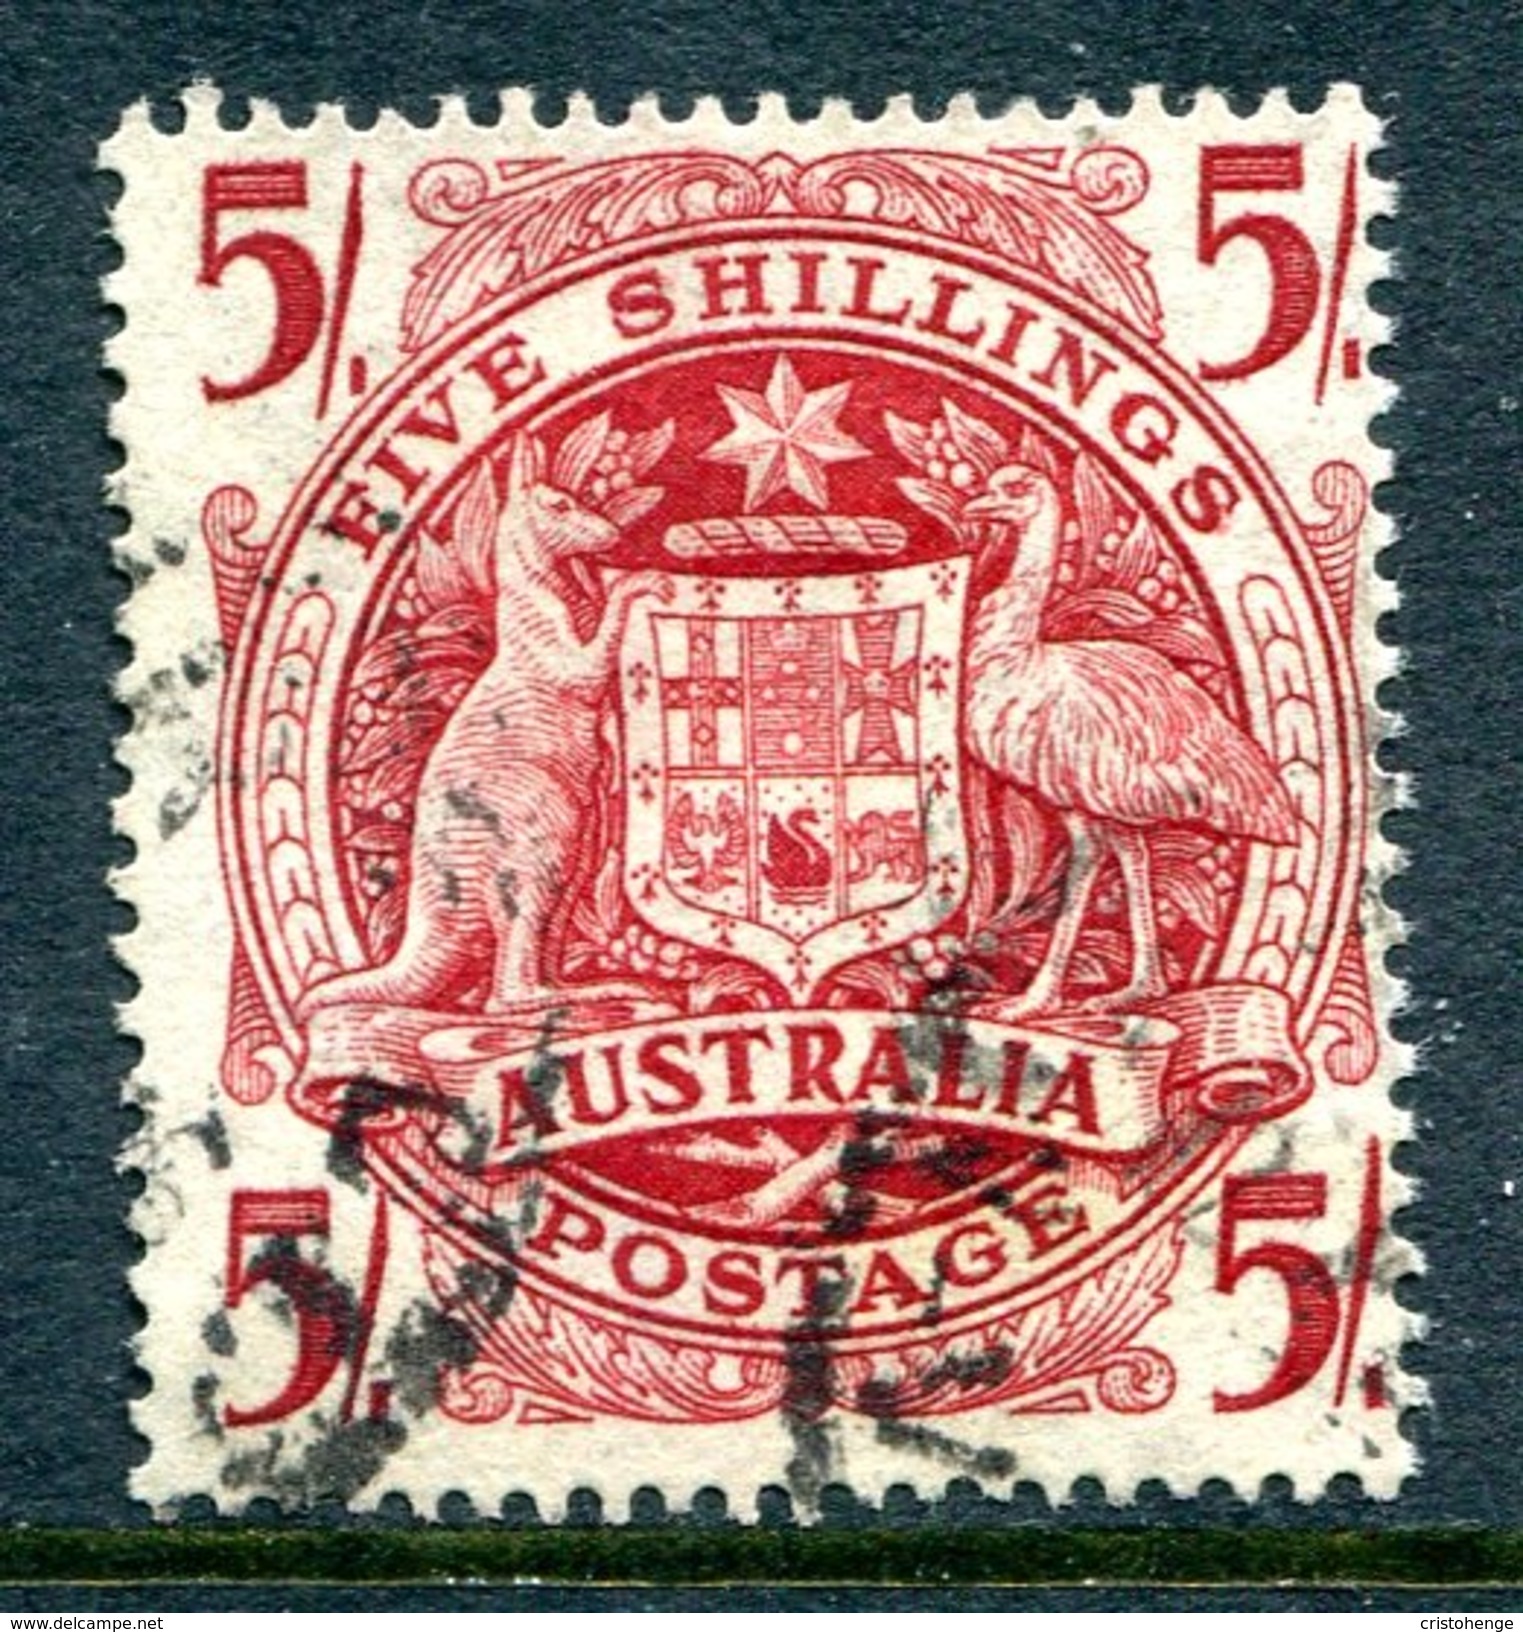 Australia 1948-56 Definitives (Wmk. Sideways) - 5/- Arms - Thin Paper Used (SG 224ab) - Mint Stamps